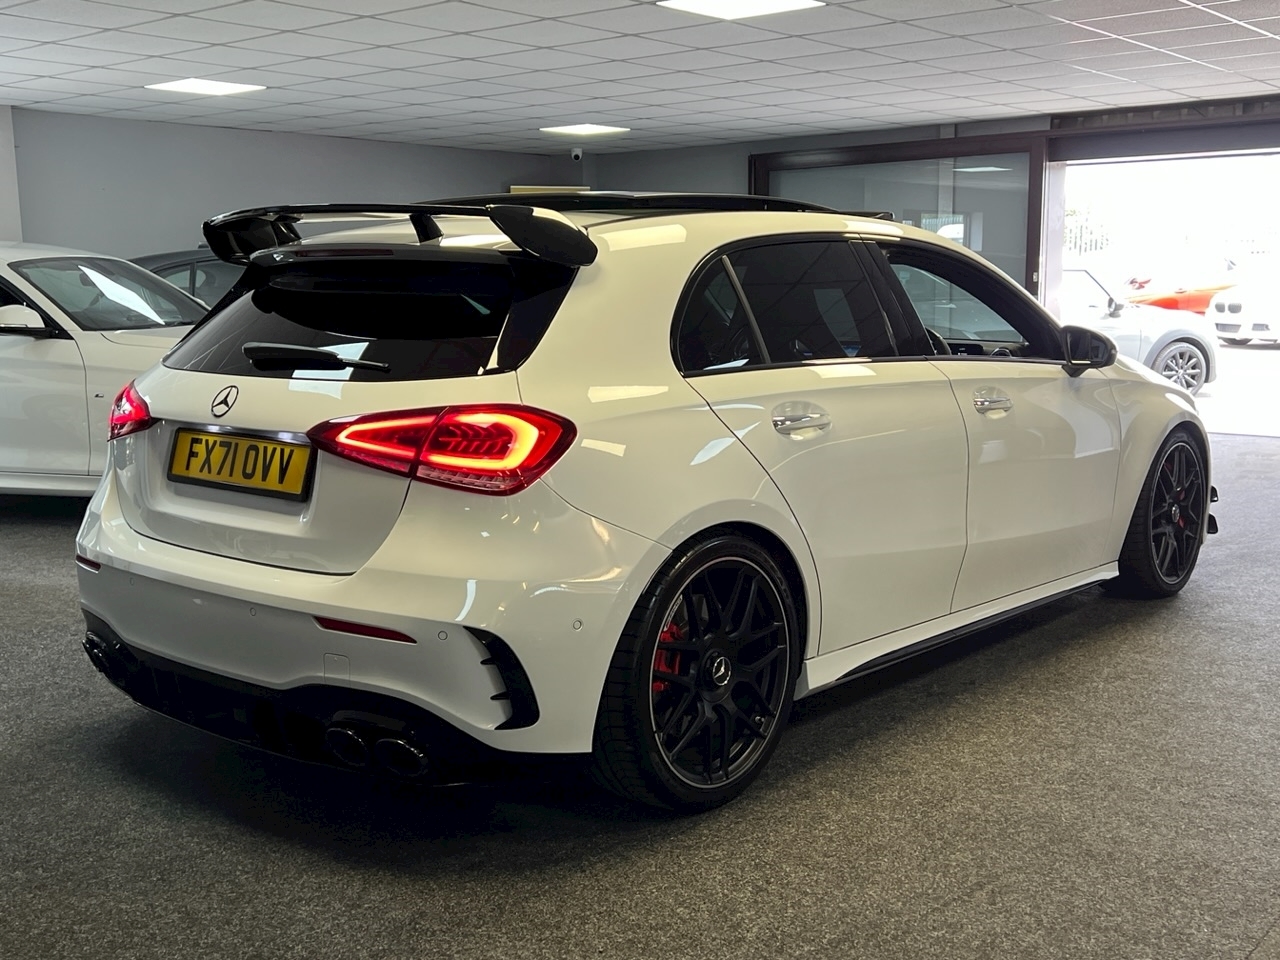 2.0 A45 AMG S Plus Hatchback 5dr Petrol 8G-DCT 4MATIC+ Euro 6 (s/s) (421 ps)